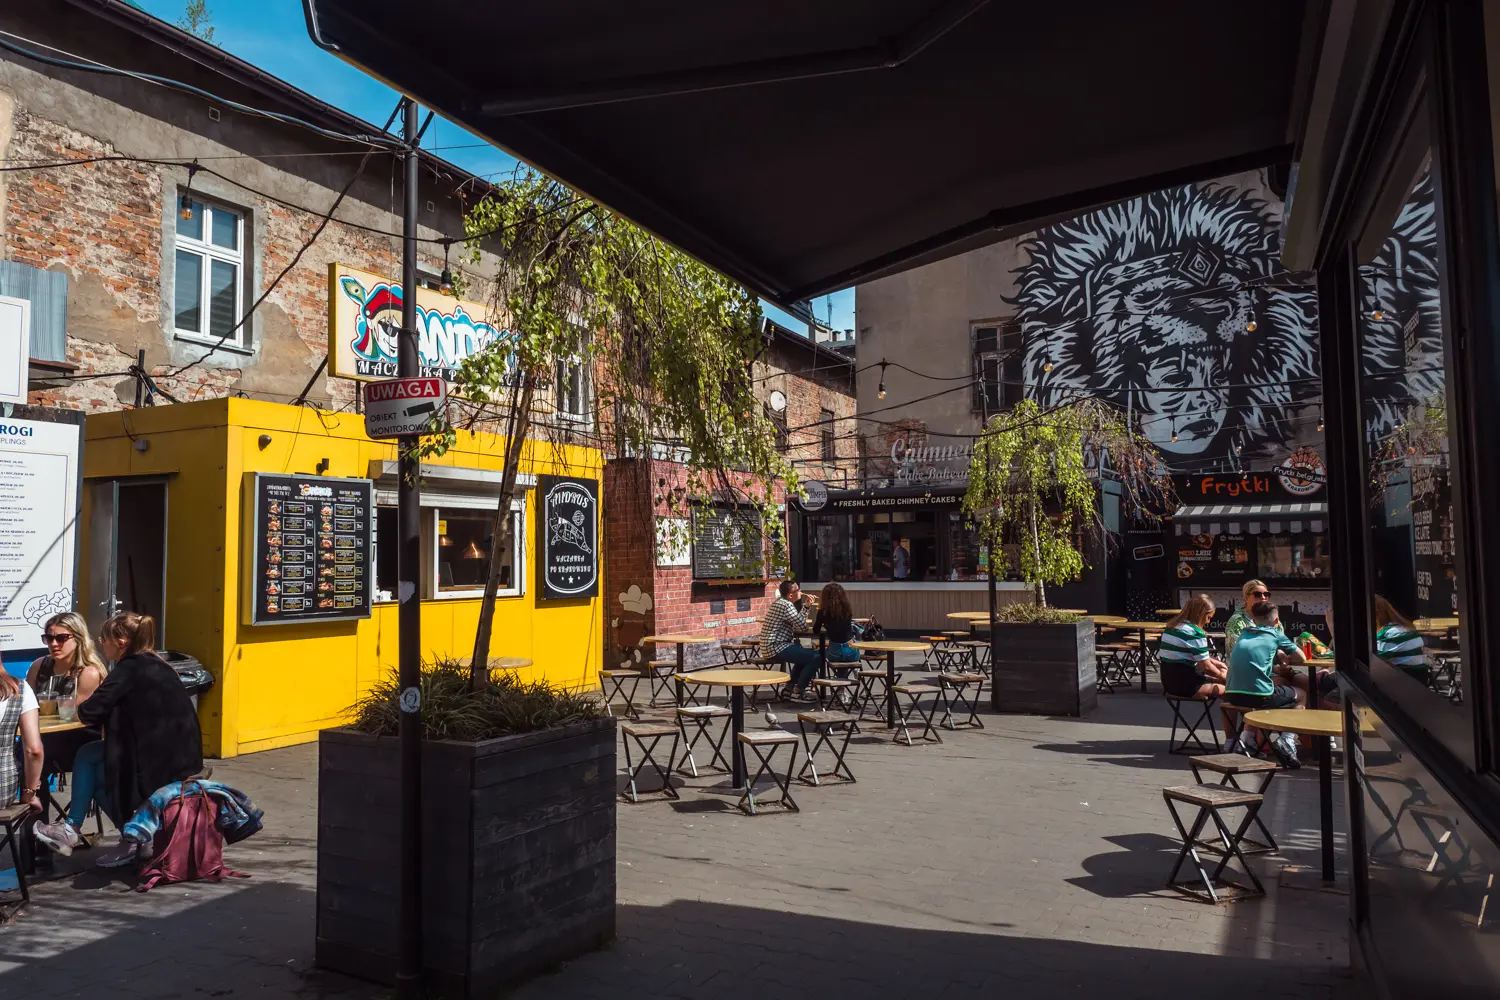 View of a concrete street  food market with a yellow food truck on the left and a black and white mural on the right, one of the best places to eat in affordable food in Krakow.